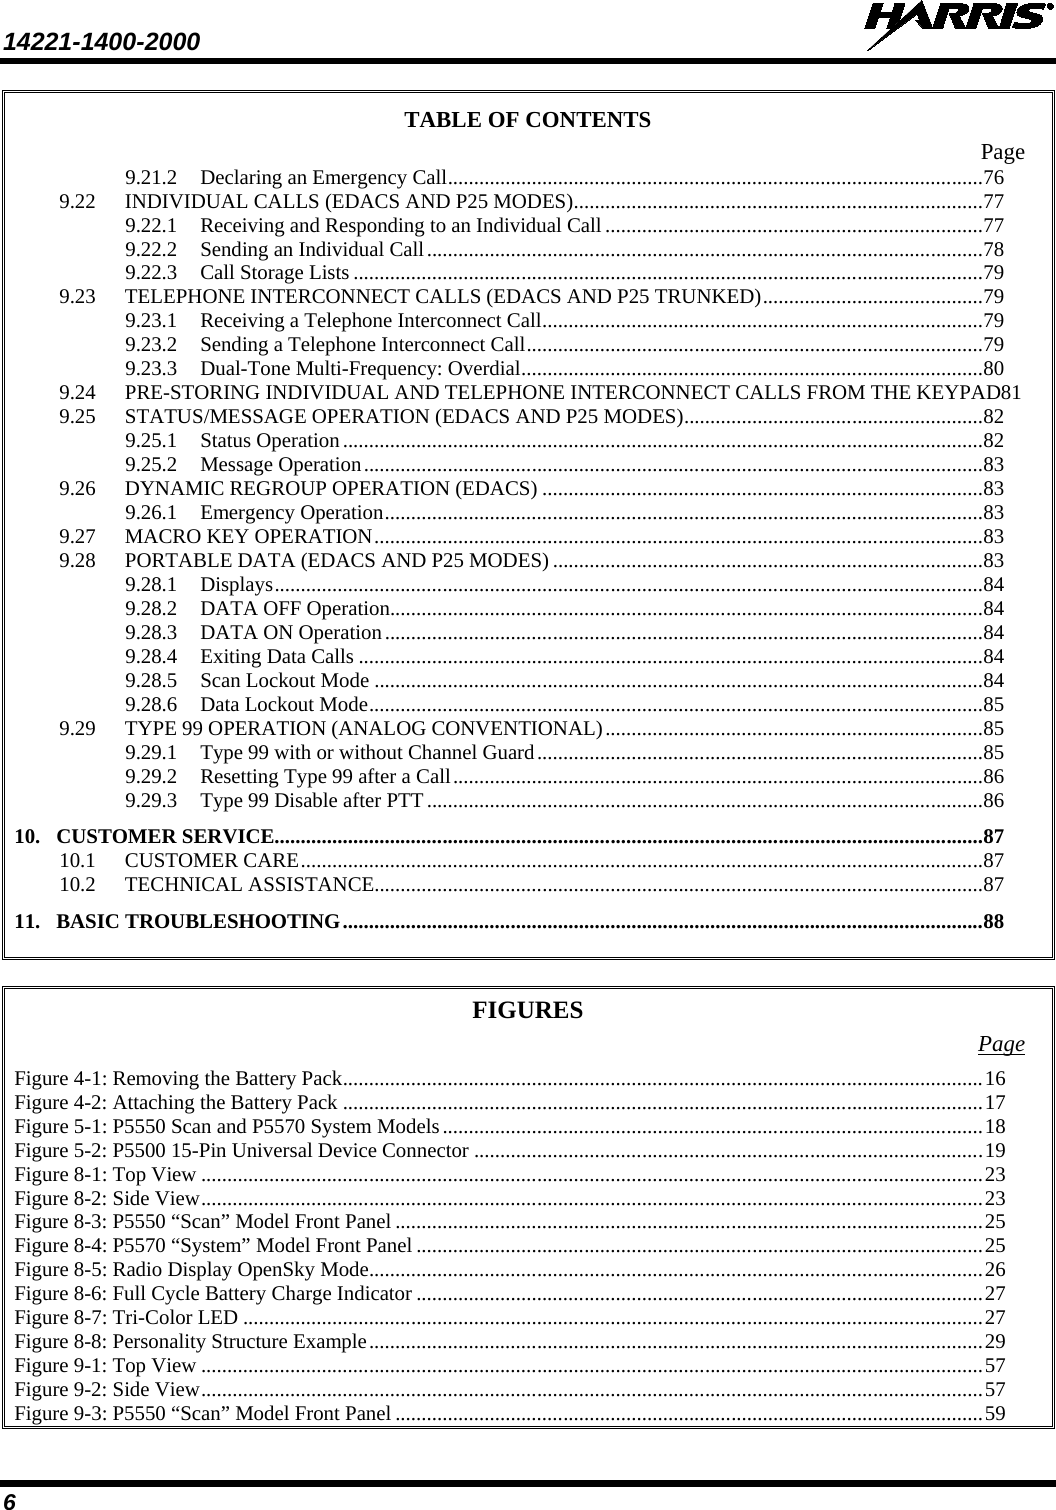 14221-1400-2000    6 TABLE OF CONTENTS Page 9.21.2 Declaring an Emergency Call ...................................................................................................... 76 9.22 INDIVIDUAL CALLS (EDACS AND P25 MODES) .............................................................................. 77 9.22.1 Receiving and Responding to an Individual Call ........................................................................ 77 9.22.2 Sending an Individual Call .......................................................................................................... 78 9.22.3 Call Storage Lists ........................................................................................................................ 79 9.23 TELEPHONE INTERCONNECT CALLS (EDACS AND P25 TRUNKED) .......................................... 79 9.23.1 Receiving a Telephone Interconnect Call .................................................................................... 79 9.23.2 Sending a Telephone Interconnect Call ....................................................................................... 79 9.23.3 Dual-Tone Multi-Frequency: Overdial ........................................................................................ 80 9.24 PRE-STORING INDIVIDUAL AND TELEPHONE INTERCONNECT CALLS FROM THE KEYPAD81 9.25 STATUS/MESSAGE OPERATION (EDACS AND P25 MODES) ......................................................... 82 9.25.1 Status Operation .......................................................................................................................... 82 9.25.2 Message Operation ...................................................................................................................... 83 9.26 DYNAMIC REGROUP OPERATION (EDACS) .................................................................................... 83 9.26.1 Emergency Operation .................................................................................................................. 83 9.27 MACRO KEY OPERATION .................................................................................................................... 83 9.28 PORTABLE DATA (EDACS AND P25 MODES) .................................................................................. 83 9.28.1 Displays ....................................................................................................................................... 84 9.28.2 DATA OFF Operation................................................................................................................. 84 9.28.3 DATA ON Operation .................................................................................................................. 84 9.28.4 Exiting Data Calls ....................................................................................................................... 84 9.28.5 Scan Lockout Mode .................................................................................................................... 84 9.28.6 Data Lockout Mode ..................................................................................................................... 85 9.29 TYPE 99 OPERATION (ANALOG CONVENTIONAL) ........................................................................ 85 9.29.1 Type 99 with or without Channel Guard ..................................................................................... 85 9.29.2 Resetting Type 99 after a Call ..................................................................................................... 86 9.29.3 Type 99 Disable after PTT .......................................................................................................... 86 10. CUSTOMER SERVICE....................................................................................................................................... 87 10.1 CUSTOMER CARE .................................................................................................................................. 87 10.2 TECHNICAL ASSISTANCE.................................................................................................................... 87 11. BASIC TROUBLESHOOTING .......................................................................................................................... 88   FIGURES Page Figure 4-1: Removing the Battery Pack   .......................................................................................................................... 16Figure 4-2: Attaching the Battery Pack   .......................................................................................................................... 17Figure 5-1: P5550 Scan and P5570 System Models   ....................................................................................................... 18Figure 5-2: P5500 15-Pin Universal Device Connector   ................................................................................................. 19Figure 8-1: Top View   ..................................................................................................................................................... 23Figure 8-2: Side View   ..................................................................................................................................................... 23Figure 8-3: P5550 “Scan” Model Front Panel   ................................................................................................................ 25Figure 8-4: P5570 “System” Model Front Panel   ............................................................................................................ 25Figure 8-5: Radio Display OpenSky Mode   ..................................................................................................................... 26Figure 8-6: Full Cycle Battery Charge Indicator   ............................................................................................................ 27Figure 8-7: Tri-Color LED   ............................................................................................................................................. 27Figure 8-8: Personality Structure Example   ..................................................................................................................... 29Figure 9-1: Top View   ..................................................................................................................................................... 57Figure 9-2: Side View   ..................................................................................................................................................... 57Figure 9-3: P5550 “Scan” Model Front Panel  ................................................................................................................ 59